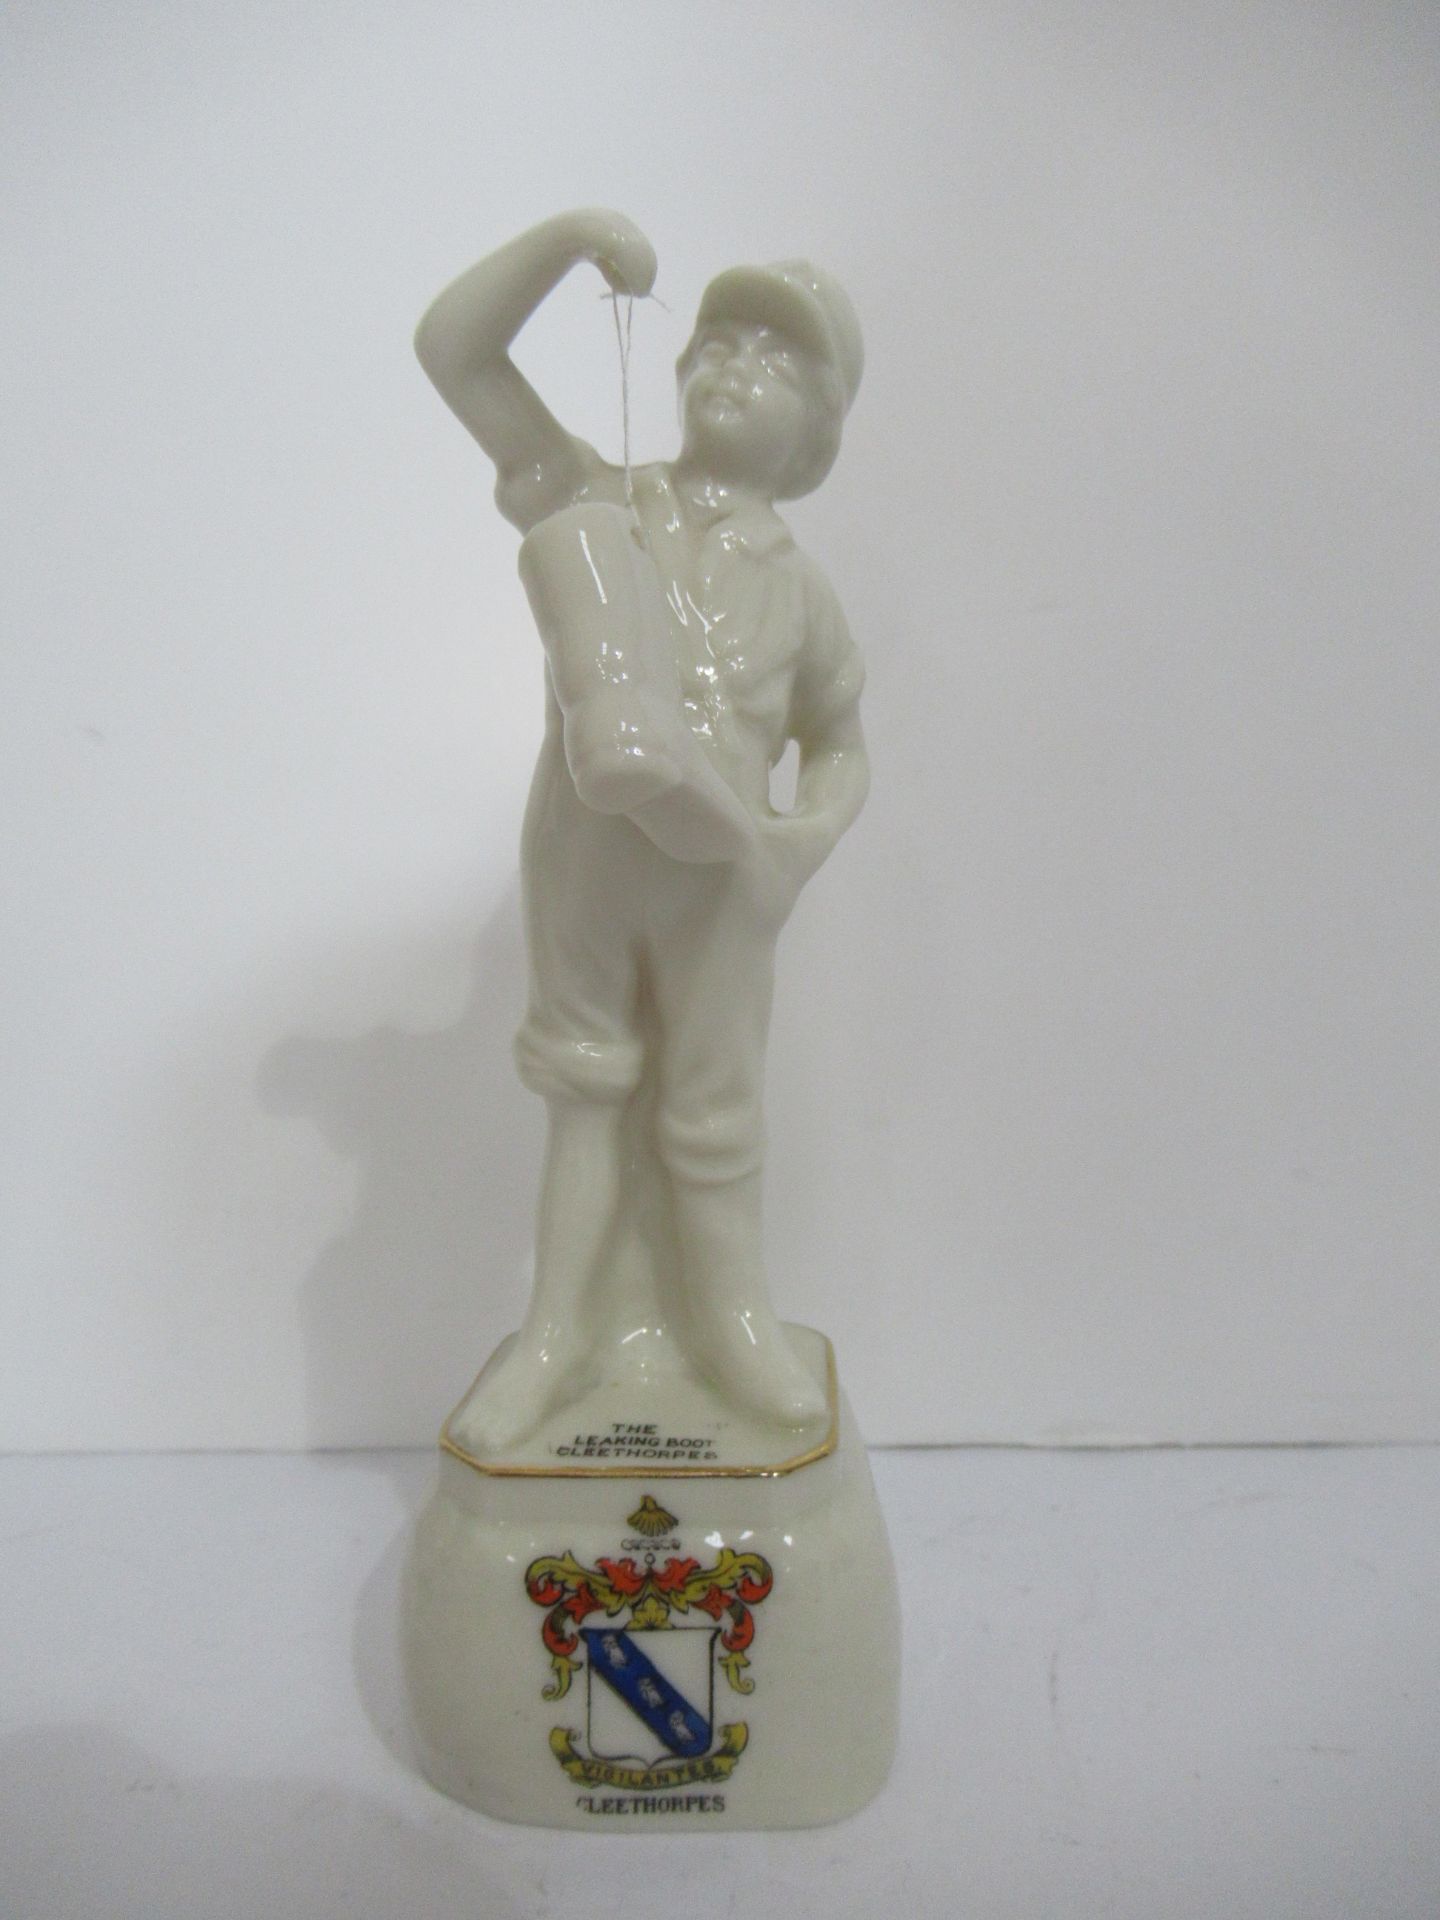 2x Crested China figures of the Leaking Boot' both with Cleethorpes coat of arms - Image 2 of 13